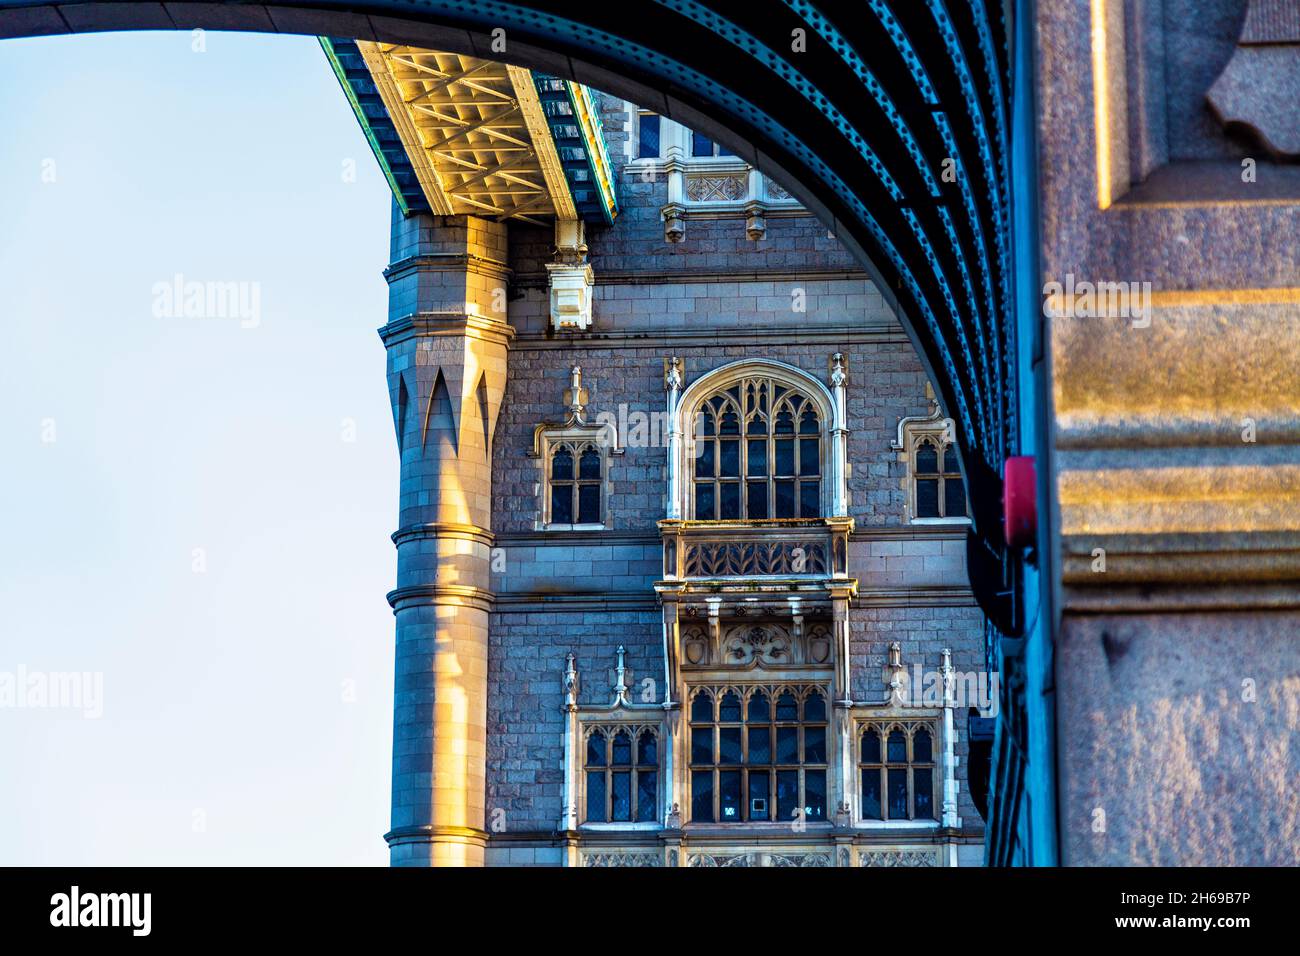 Close-up of Tower Bridge over the Thames River at evening time, London, UK Stock Photo